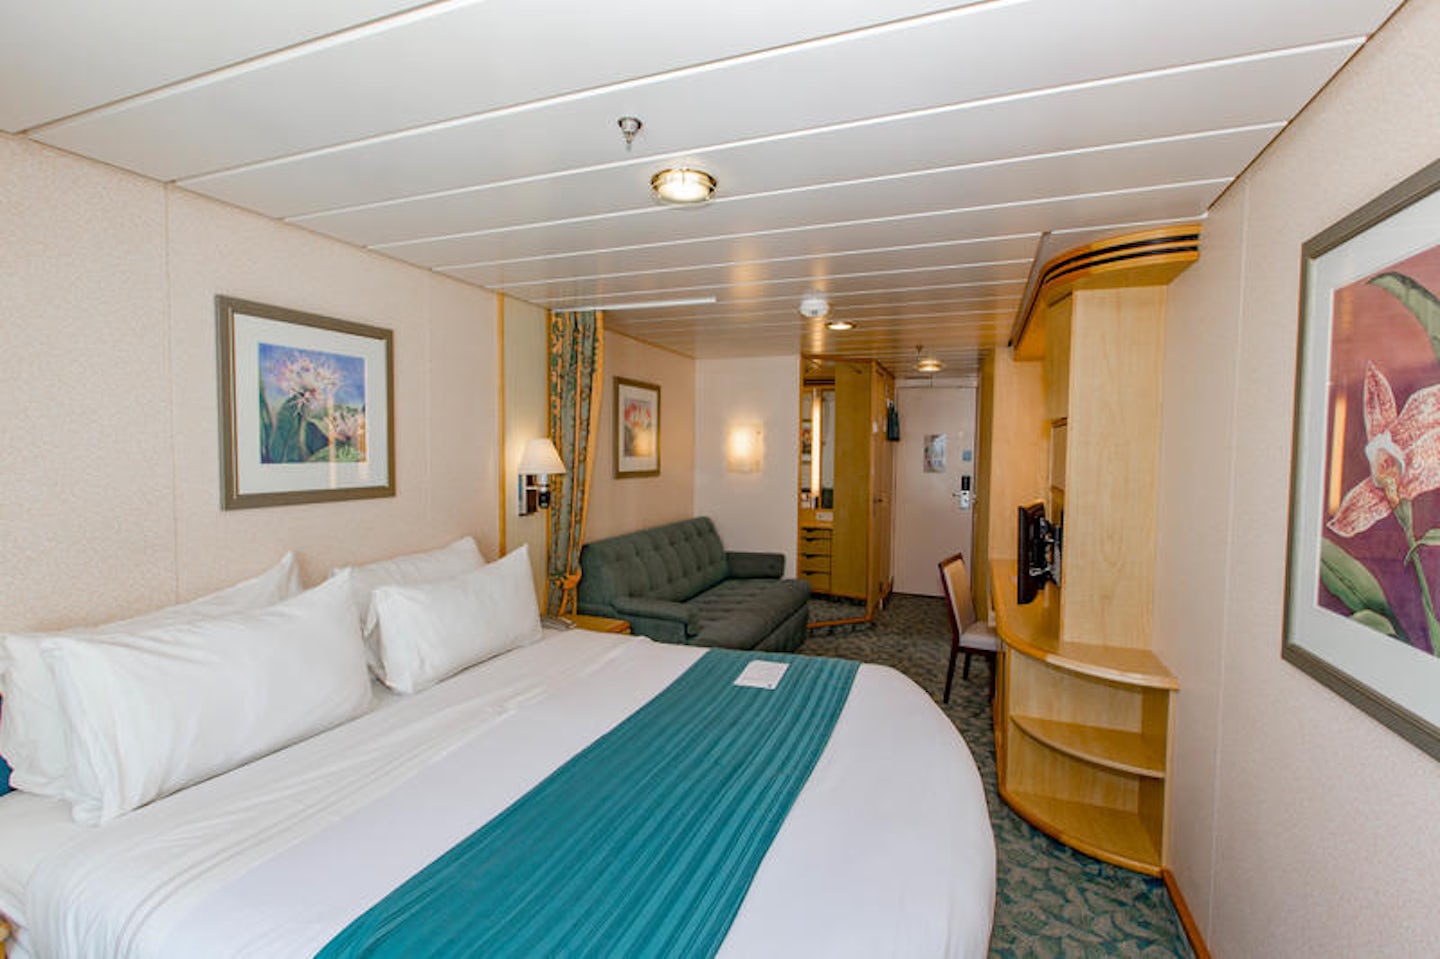 The Ocean-View Cabin on Mariner of the Seas